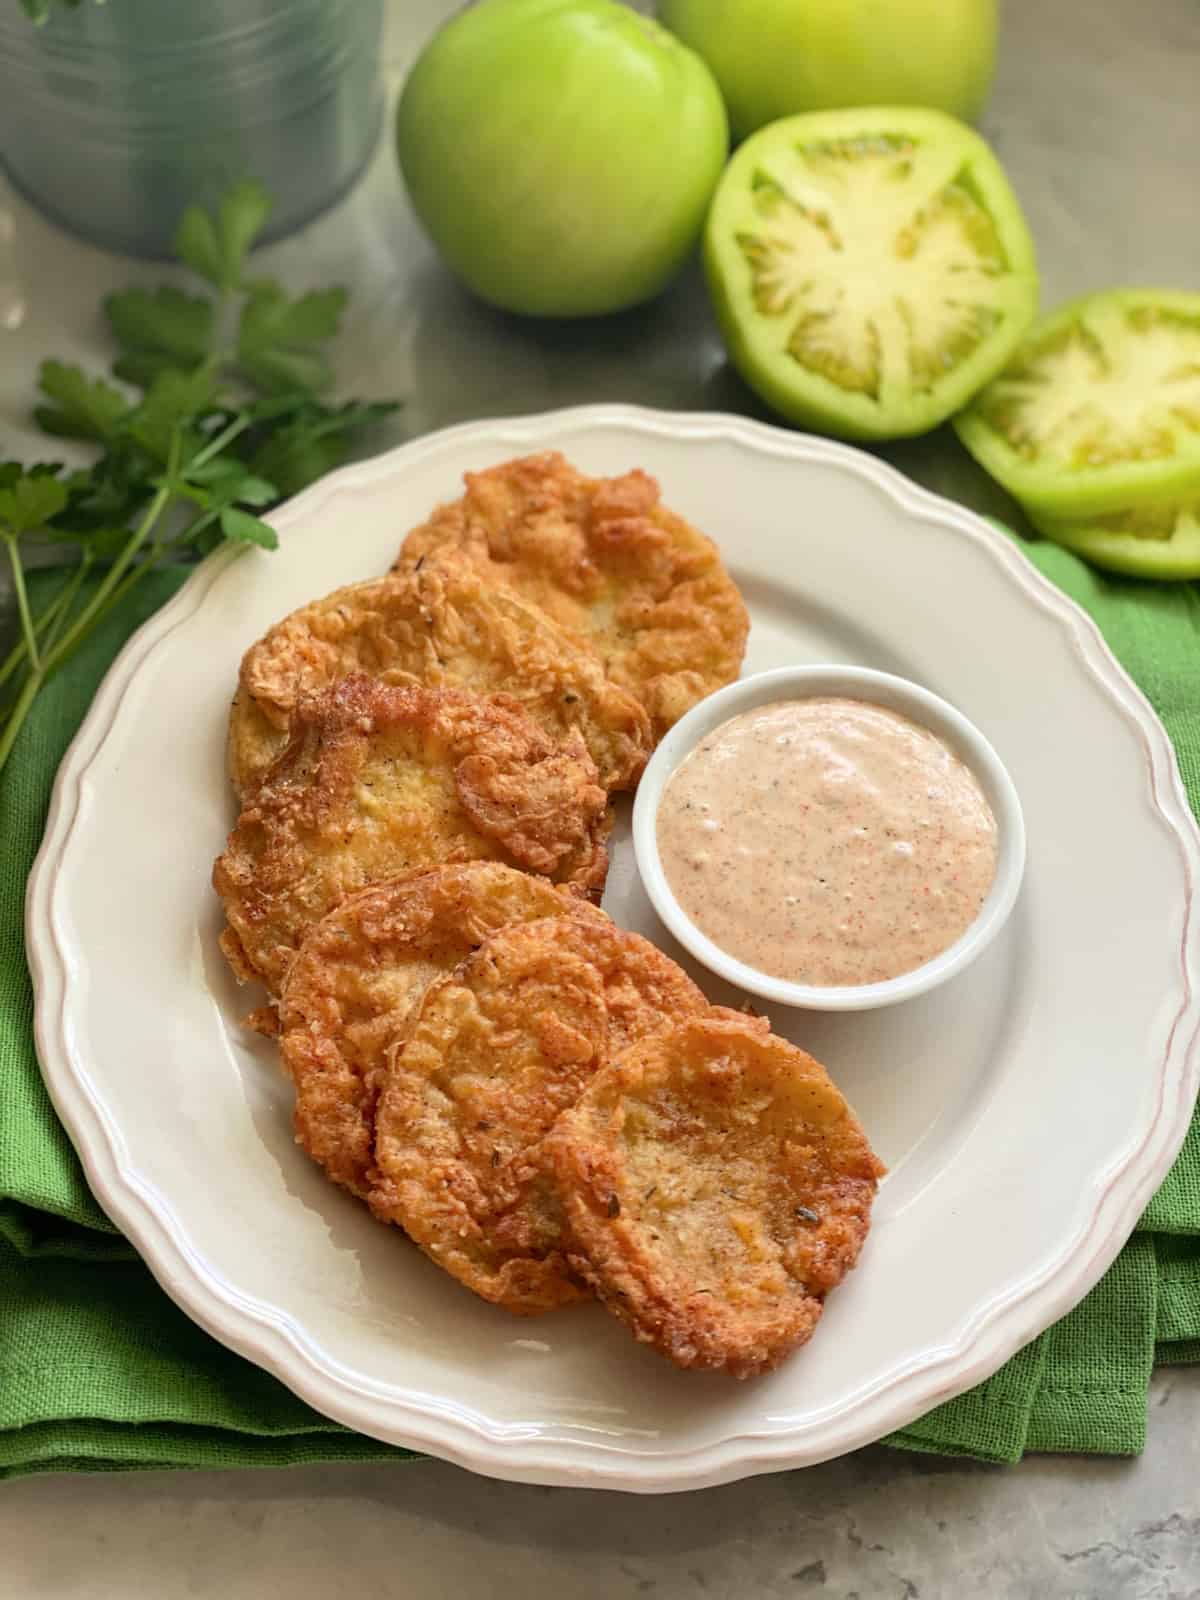 Six golden Fried Green Tomatoes on a white plate with siced green tomatoes on the counter.